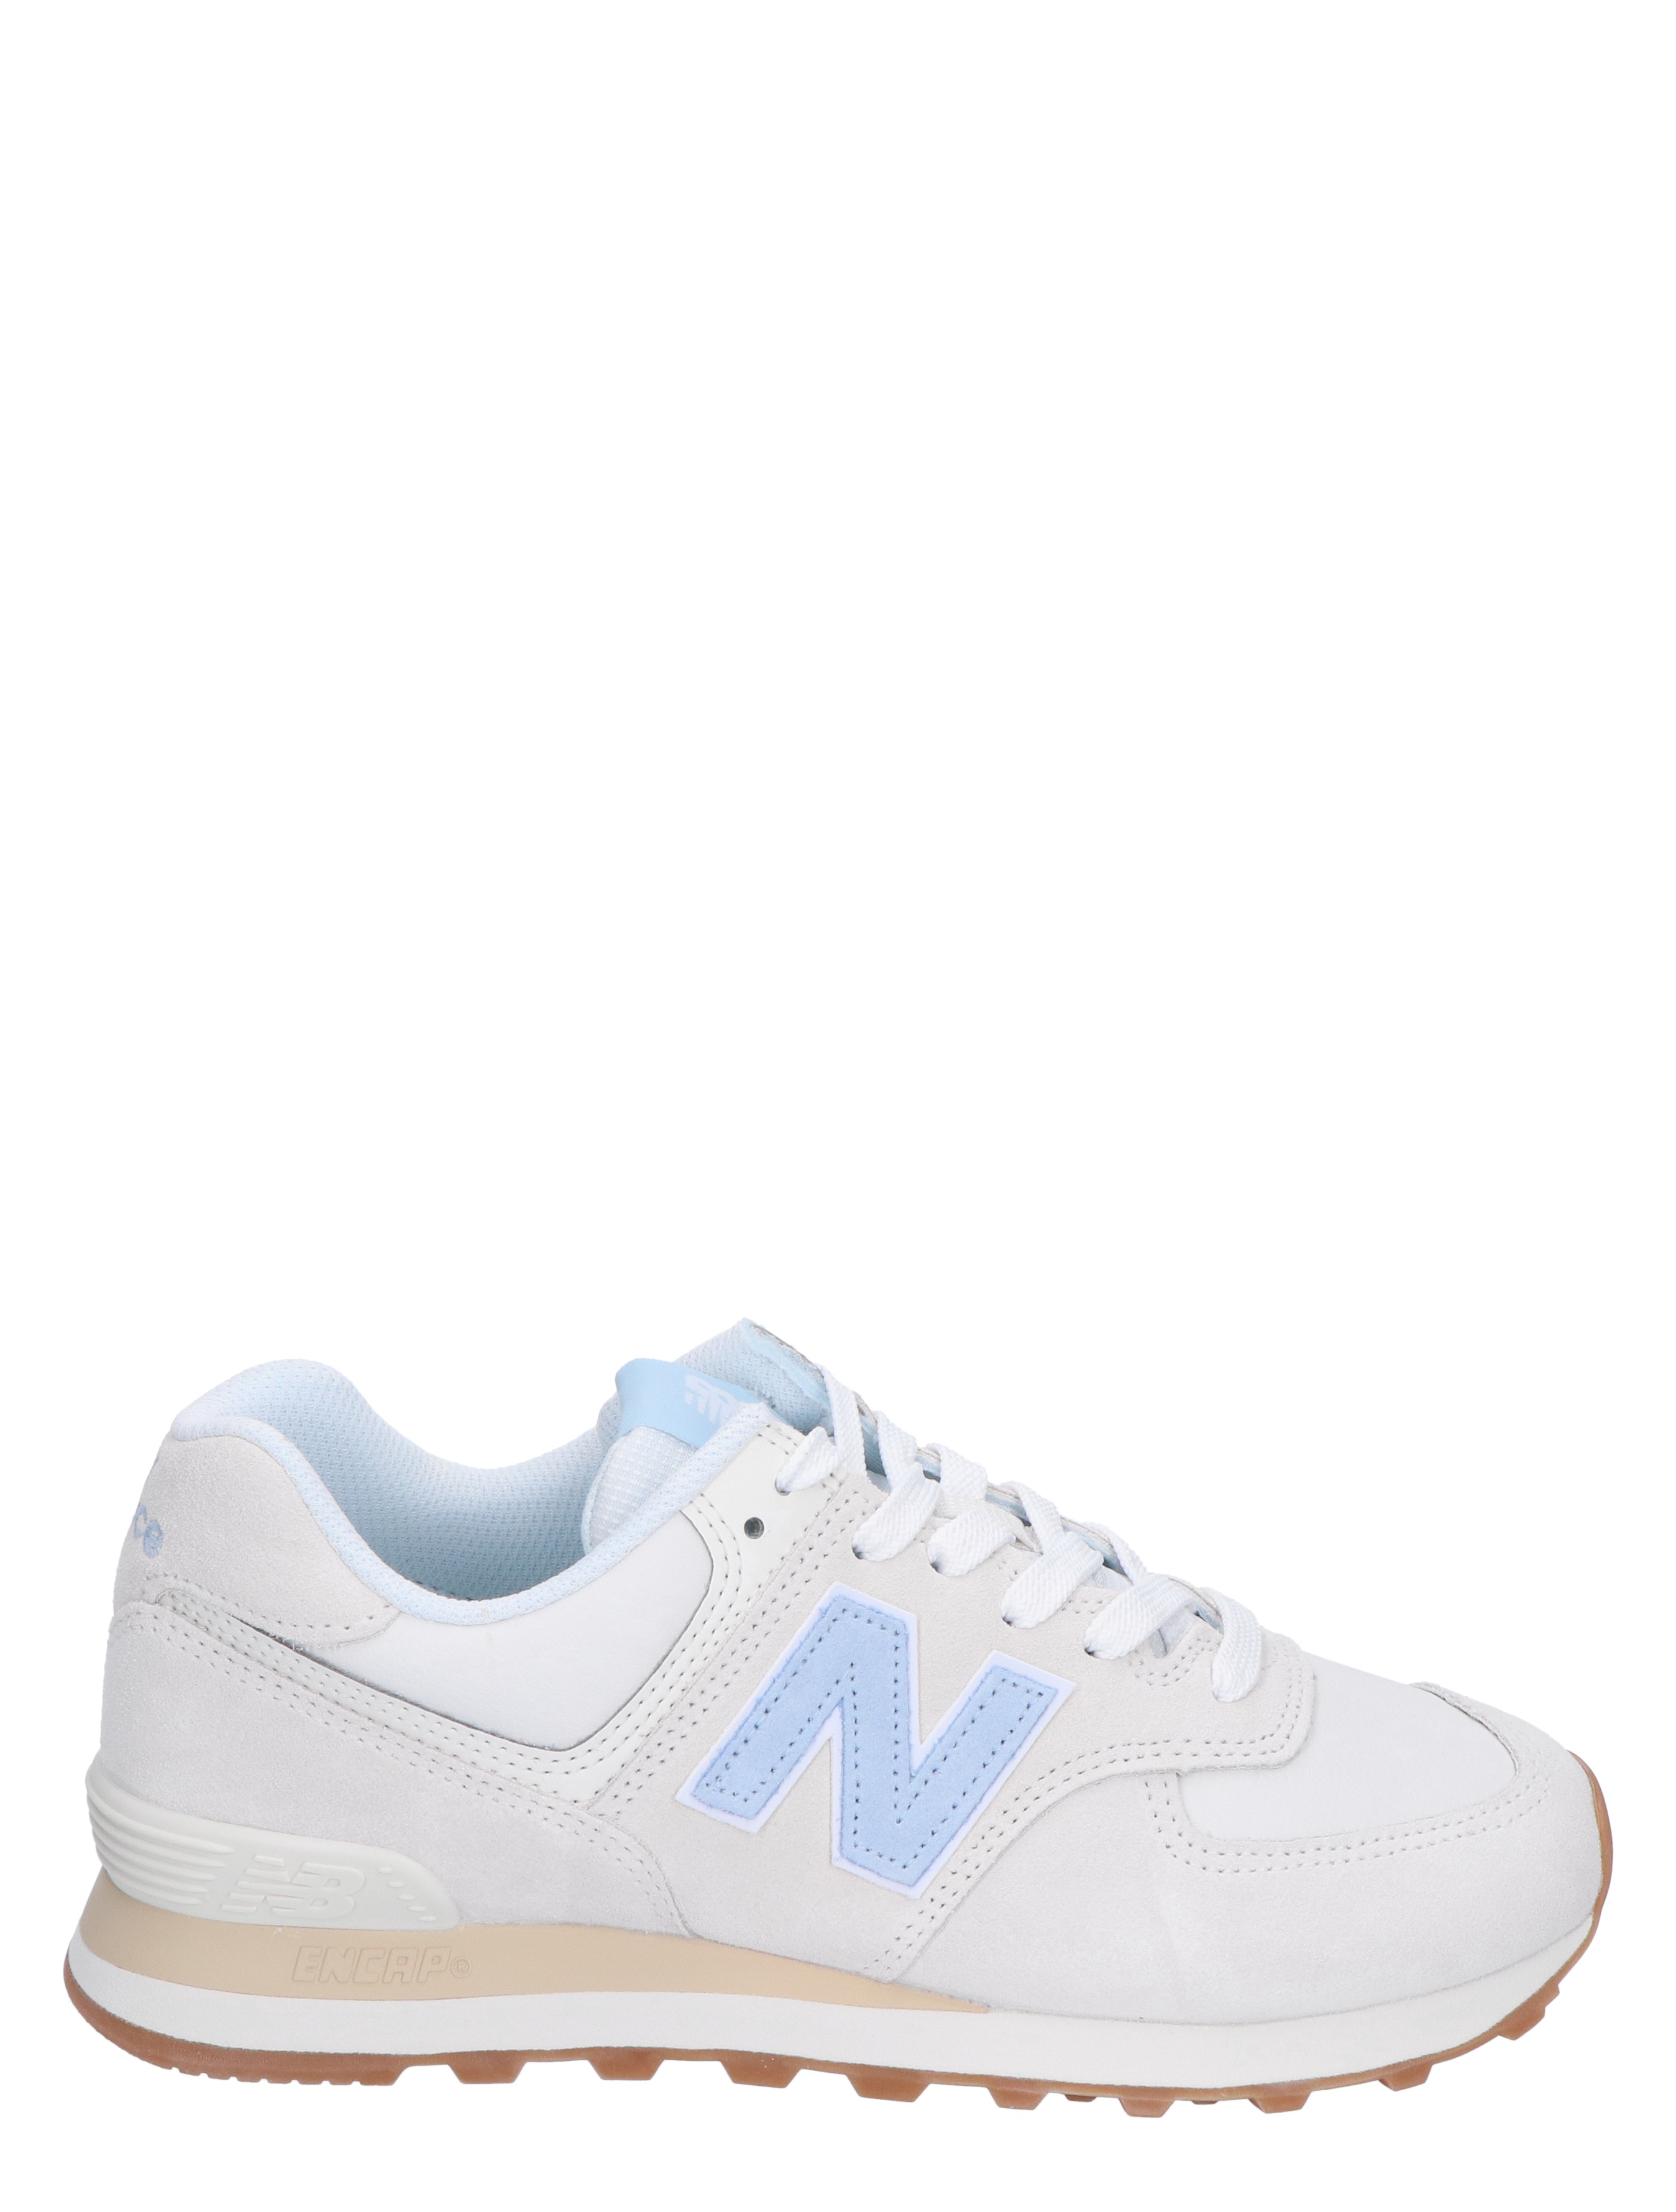 New balance 574 Reflection Sneakers